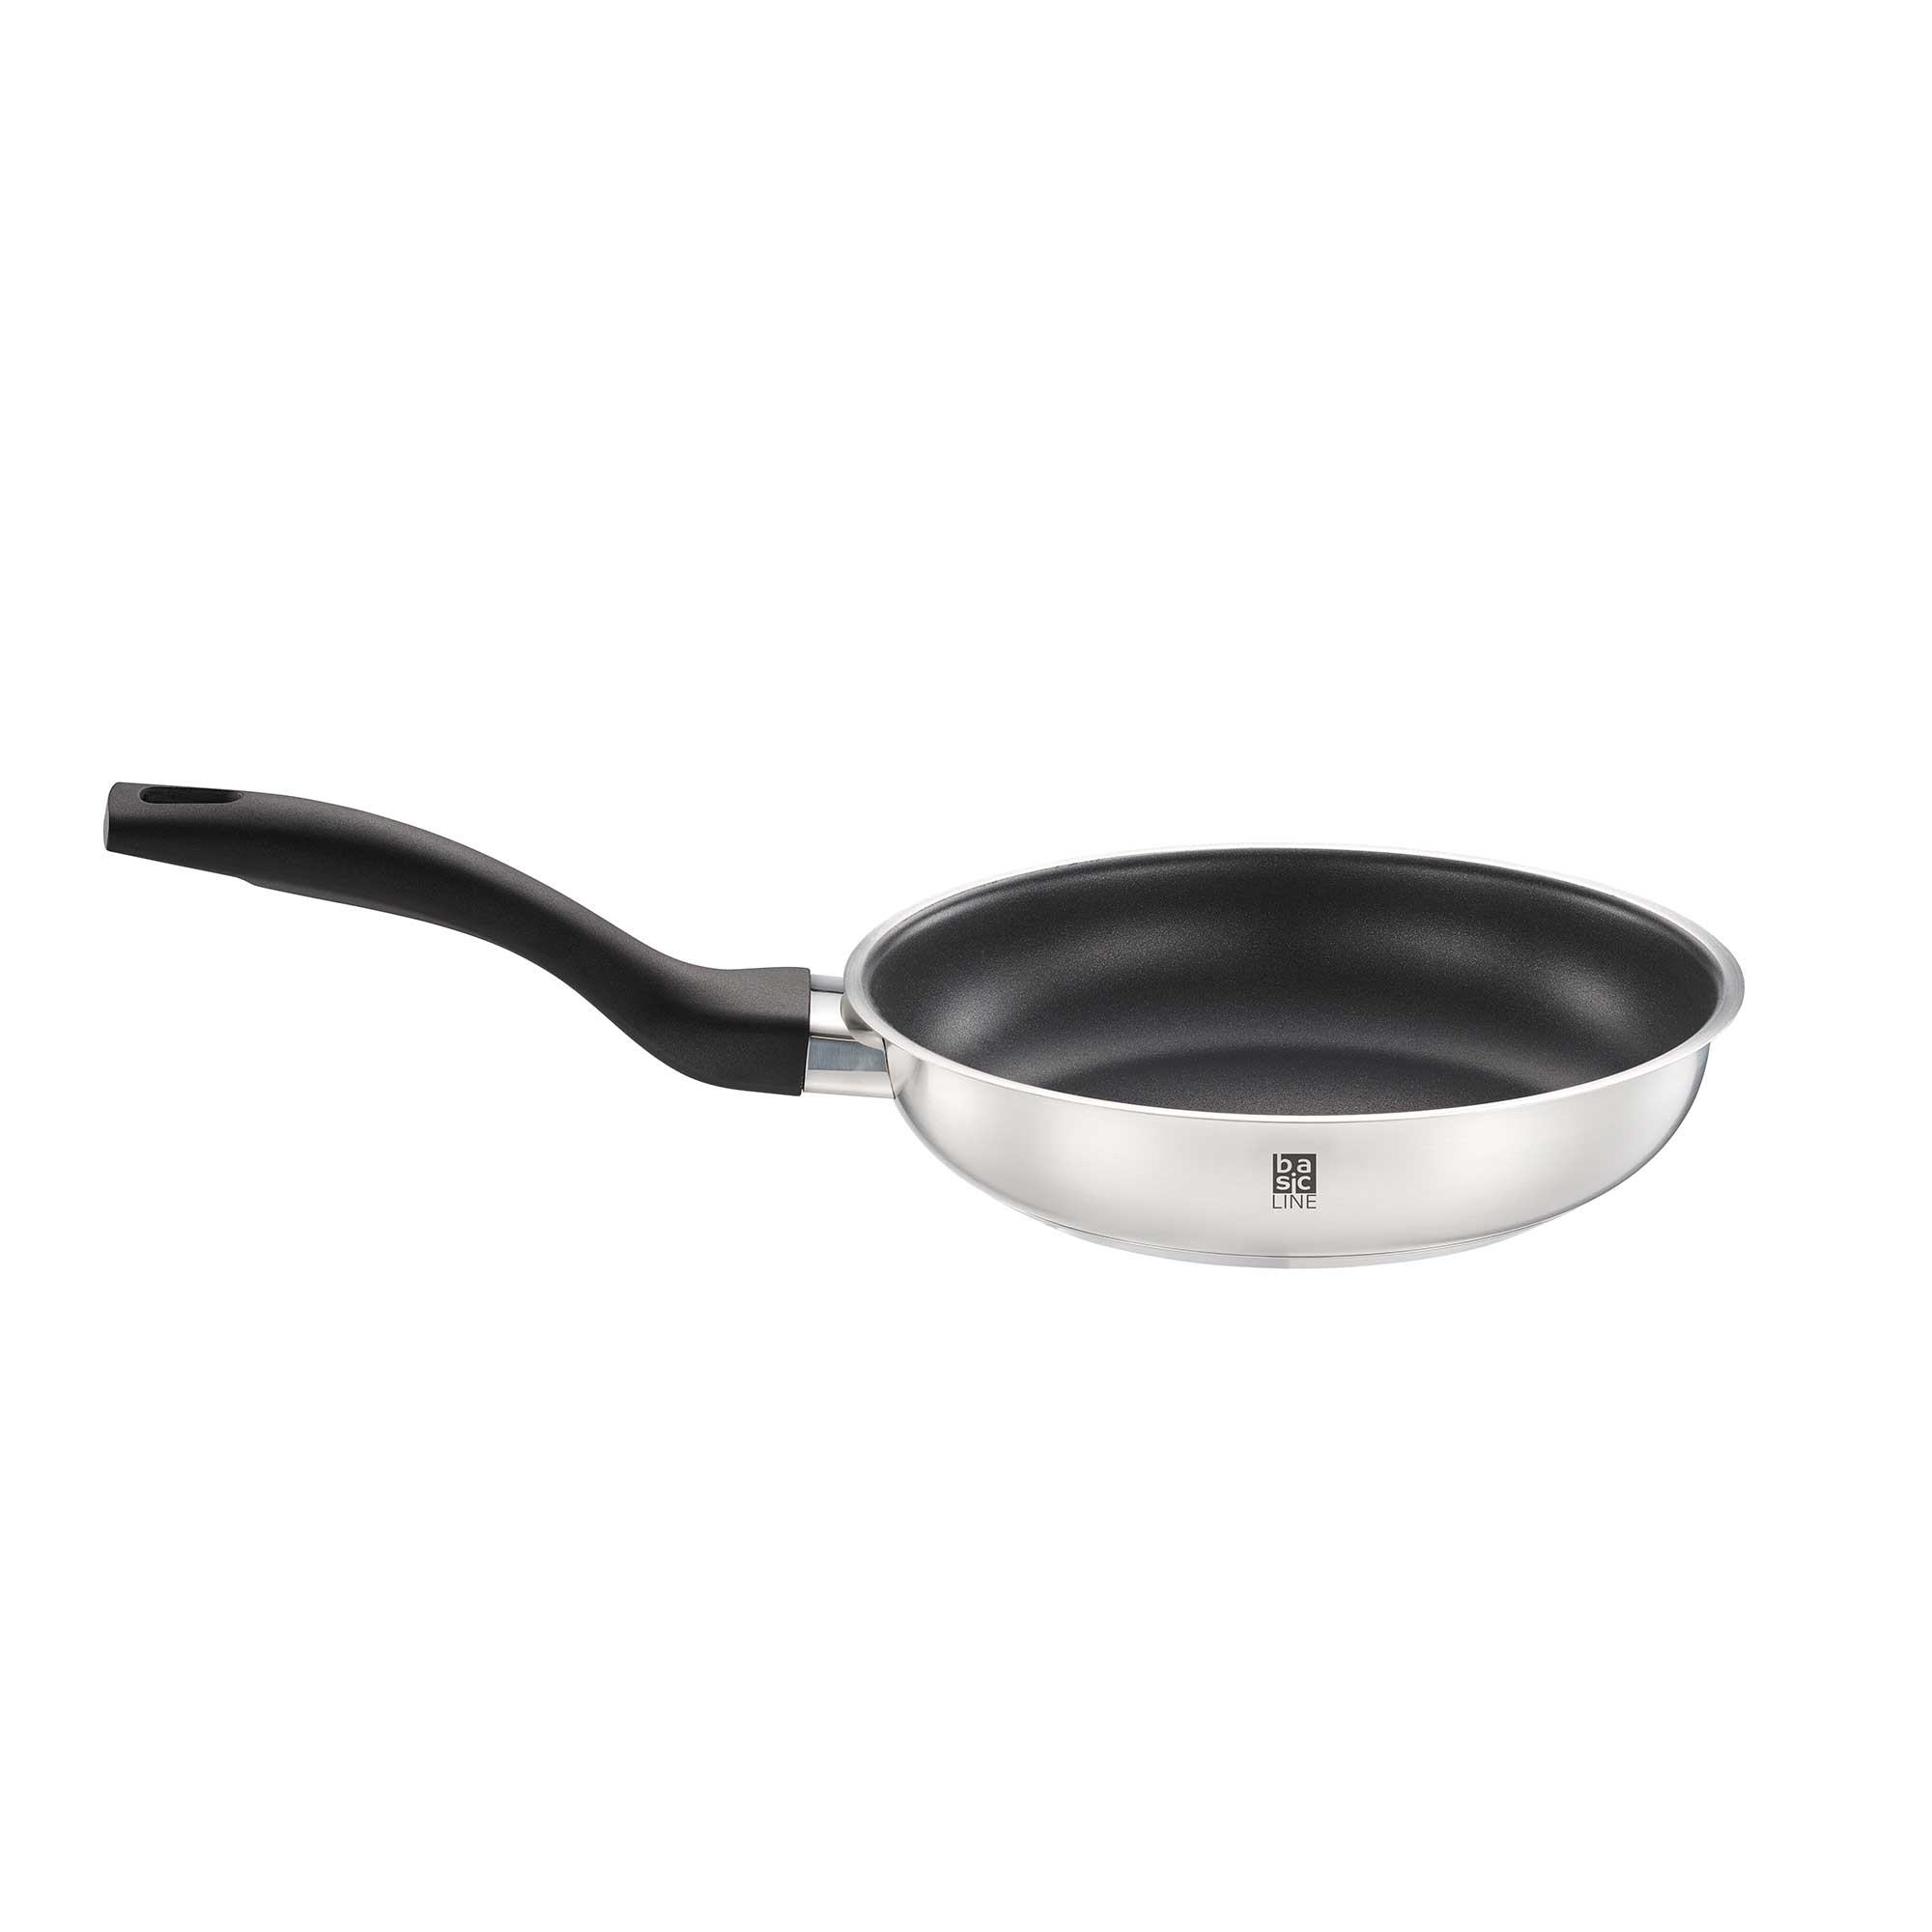 Frying pan "Basic Line" Ø 20 cm with non-stick coating ProPlex